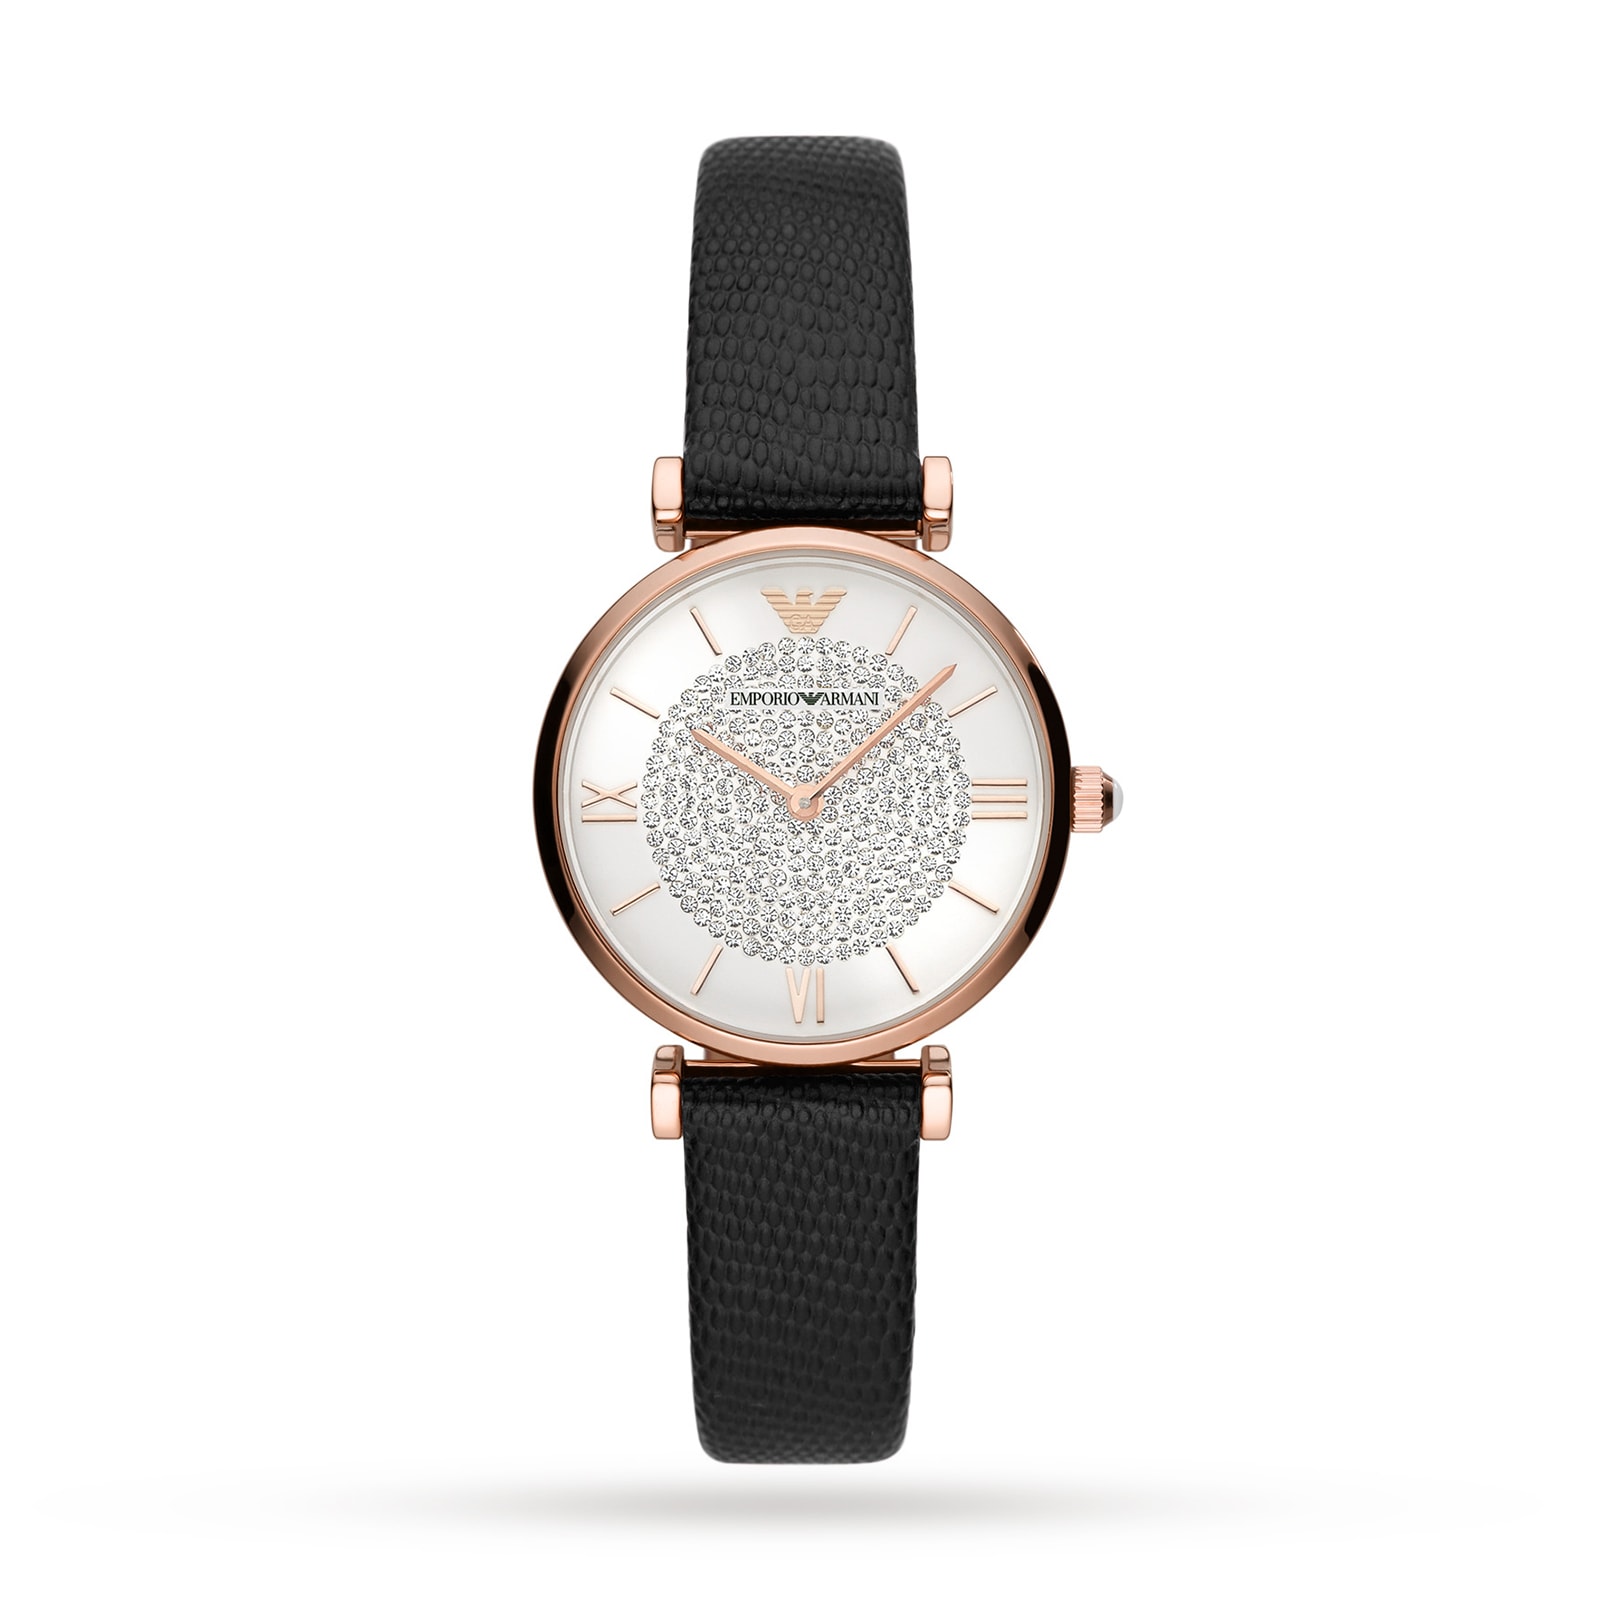 Ladie’s Leather Strap Watch